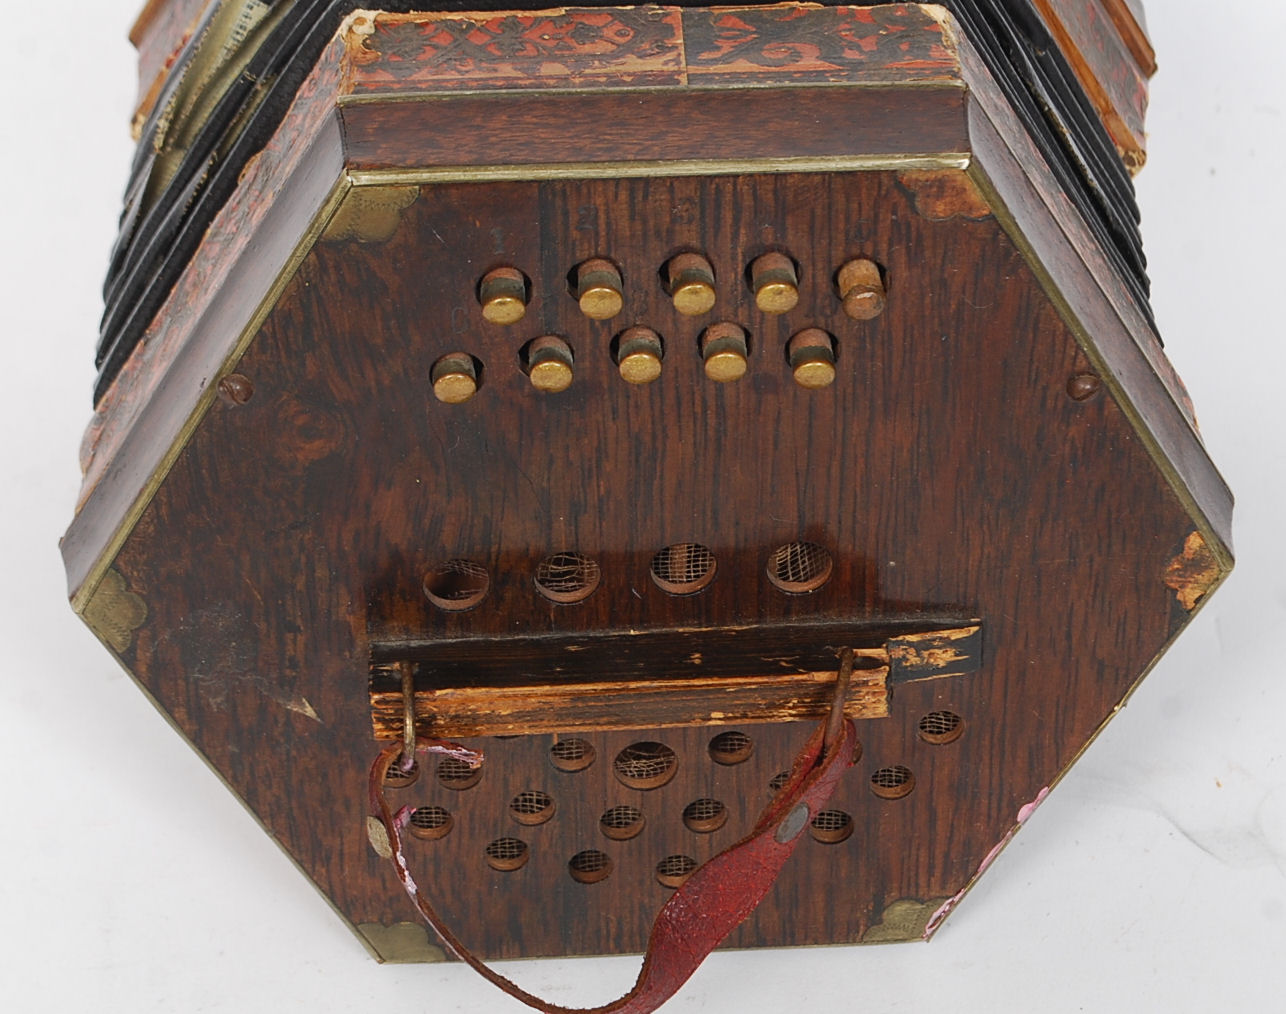 A vintage wooden squeeze box accordion instrument with central bellows and push buttons to both - Image 3 of 3